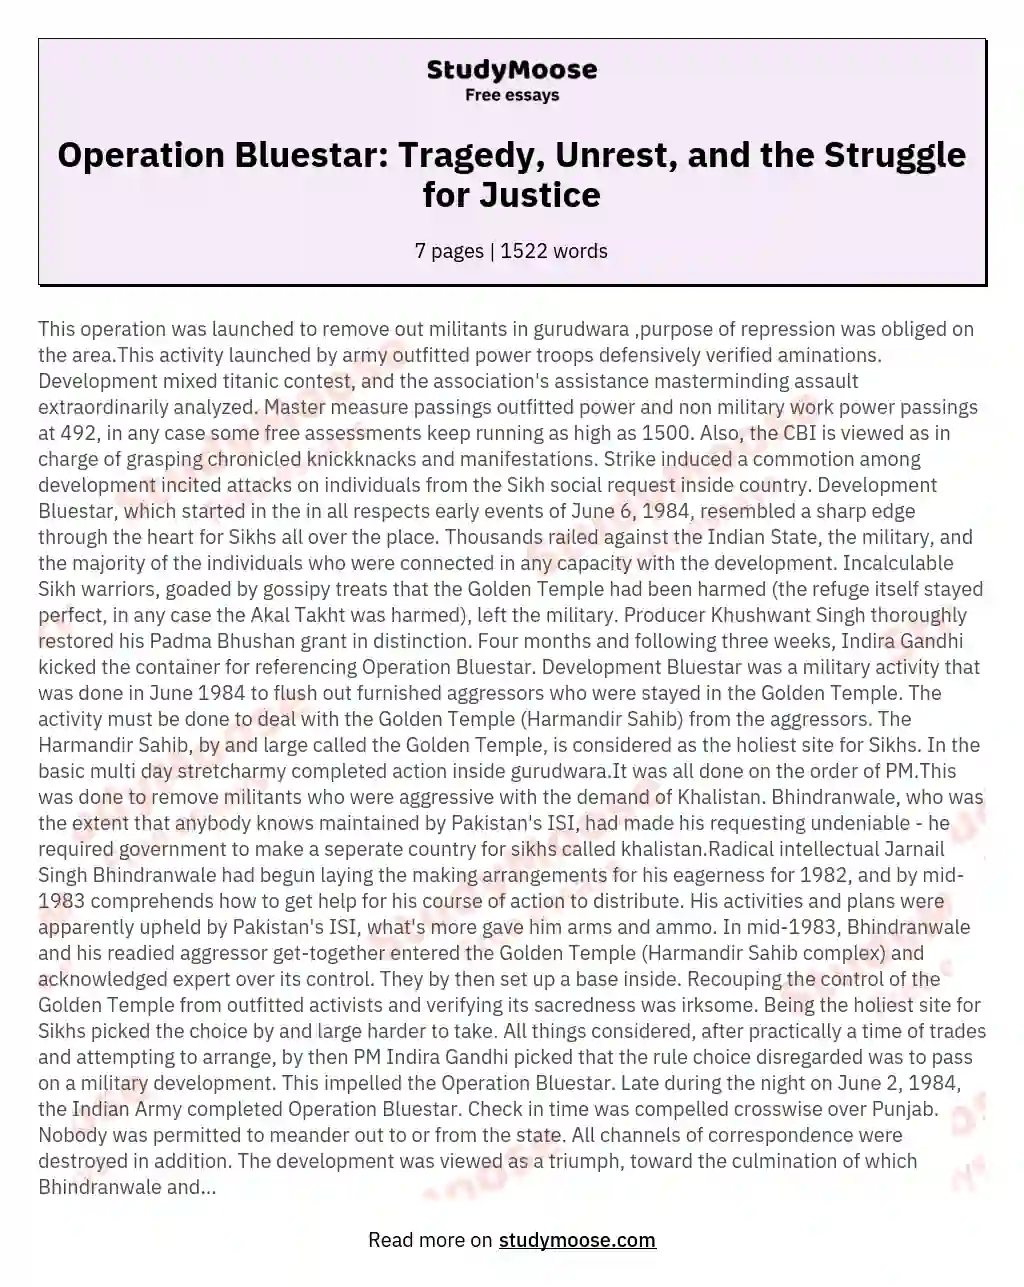 Operation Bluestar: Tragedy, Unrest, and the Struggle for Justice essay